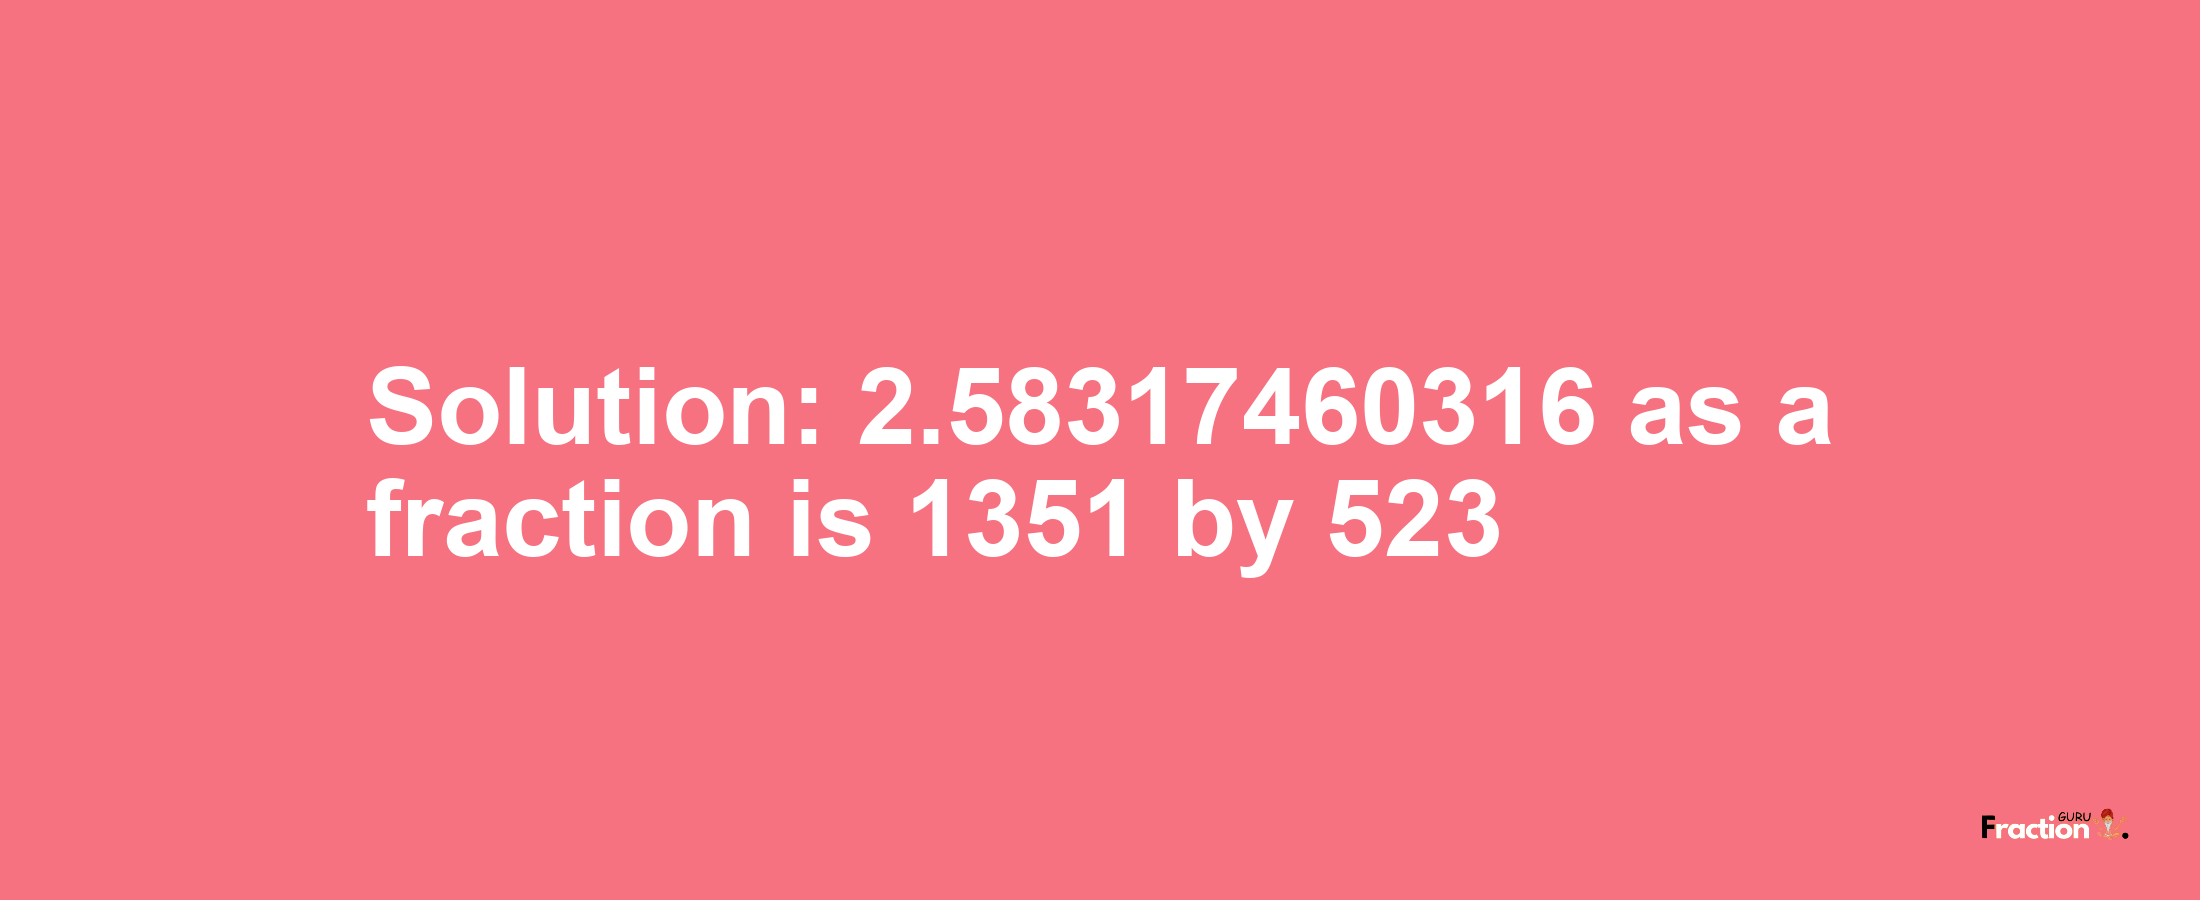 Solution:2.58317460316 as a fraction is 1351/523